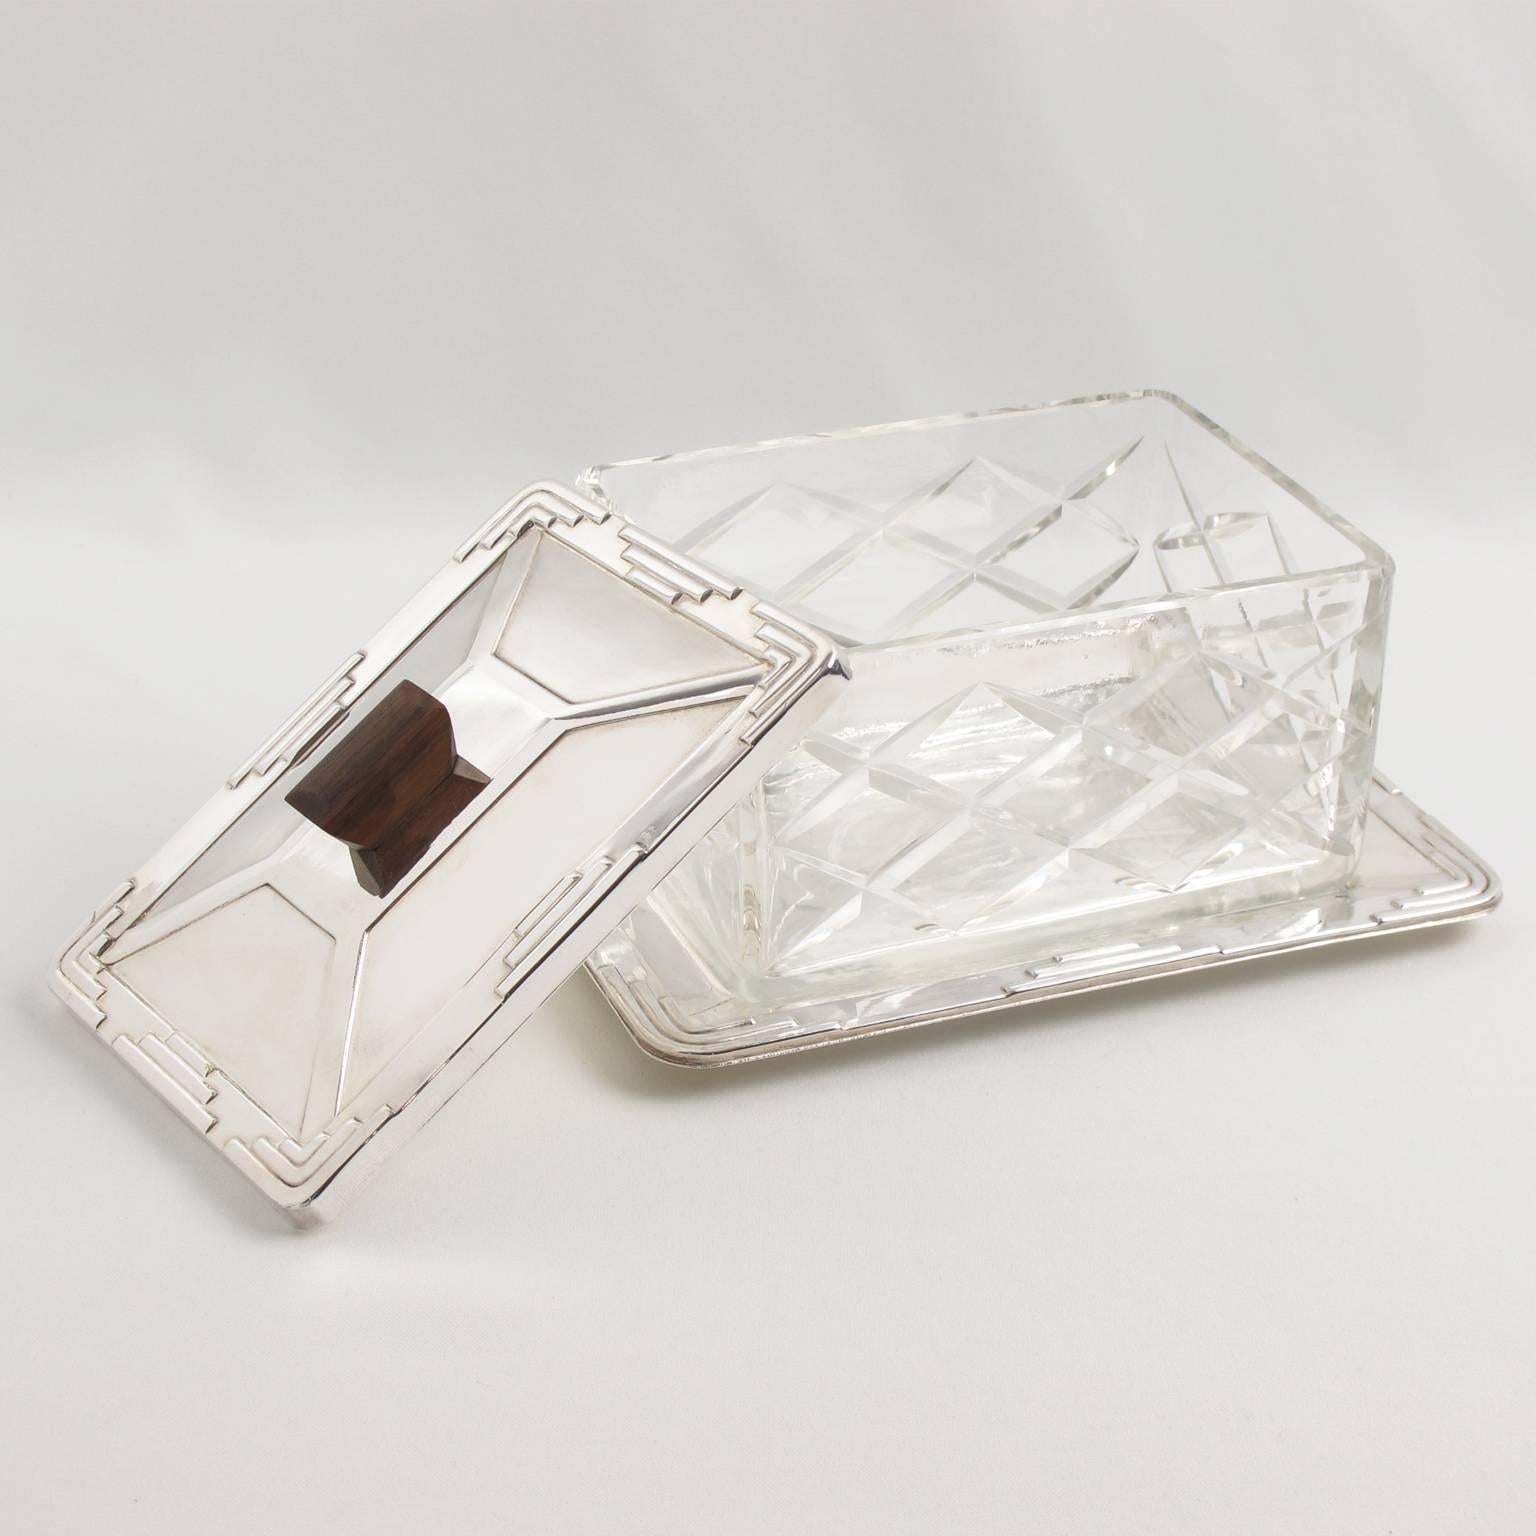 Mid-20th Century French Art Deco Silver Plate & Crystal Decorative Serving Cookie Box circa 1930s